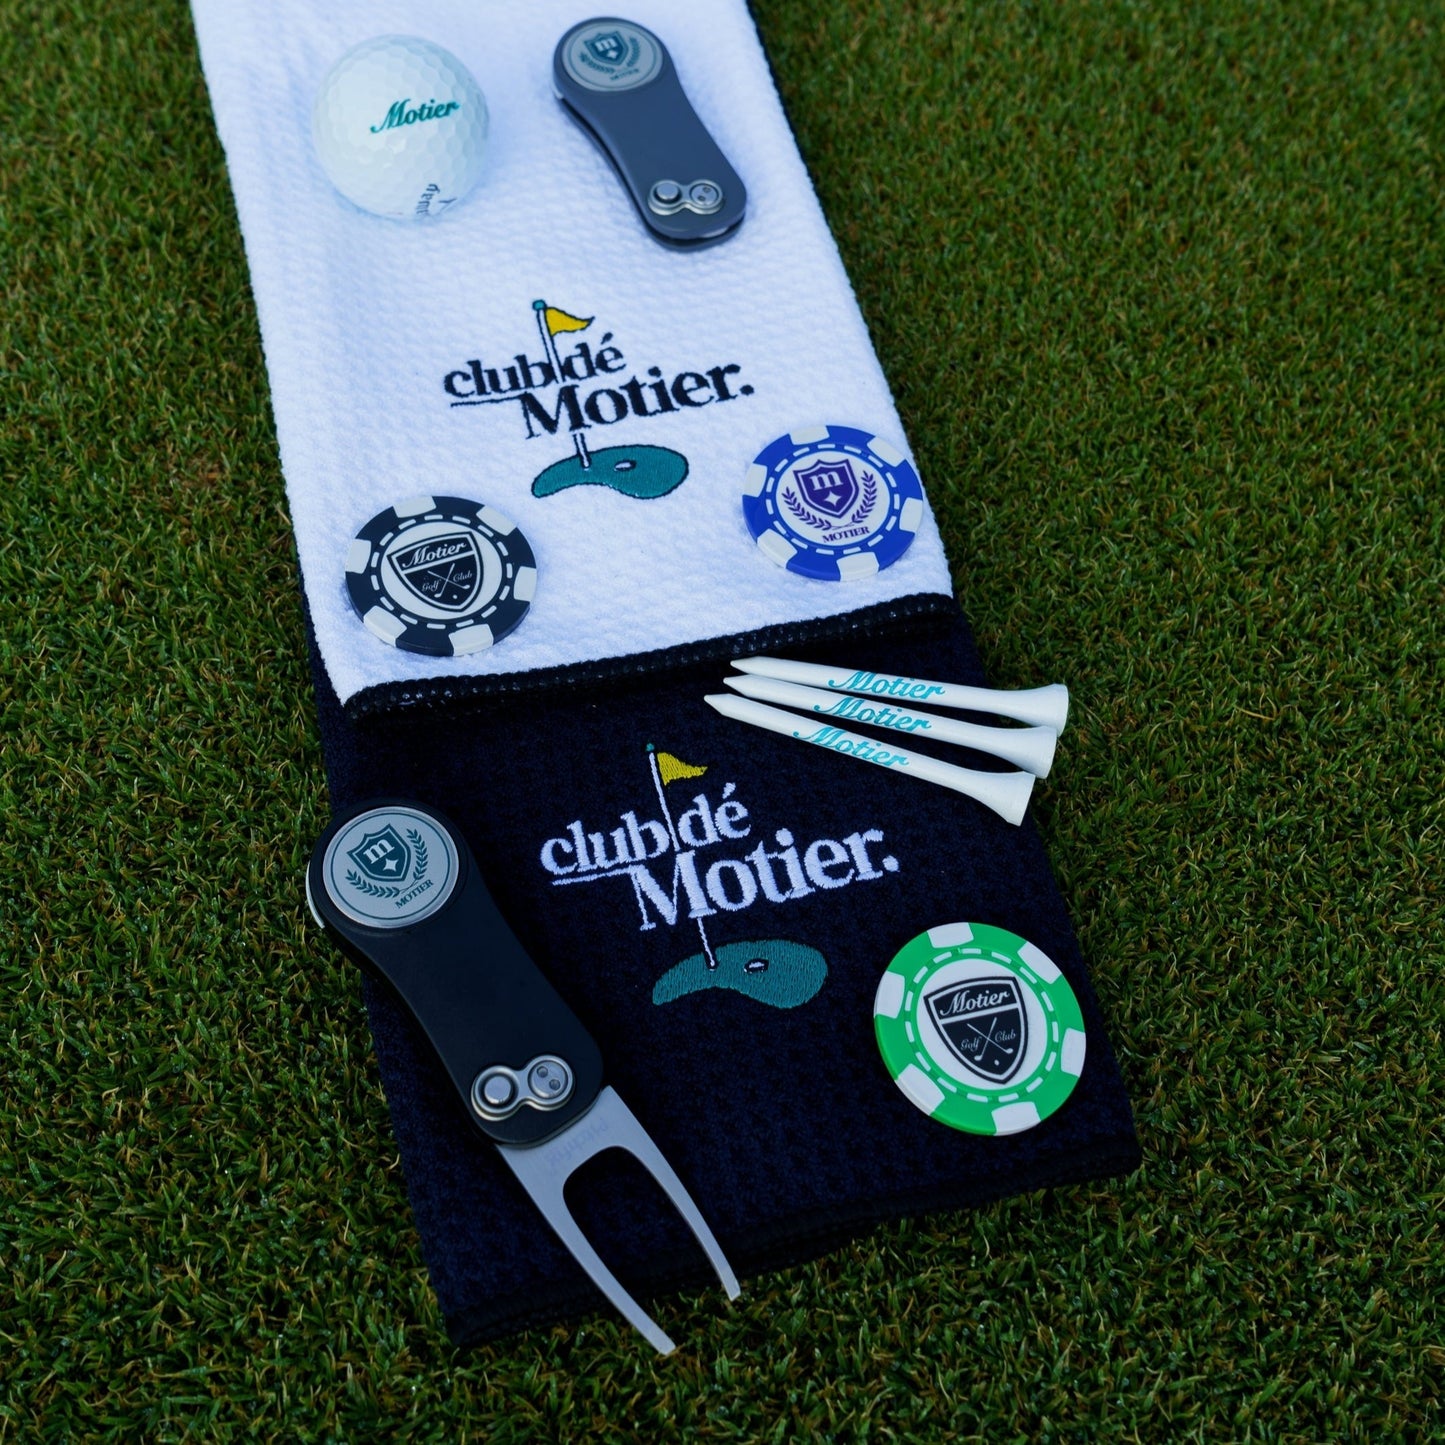 The Motier Golf Accessory Pack